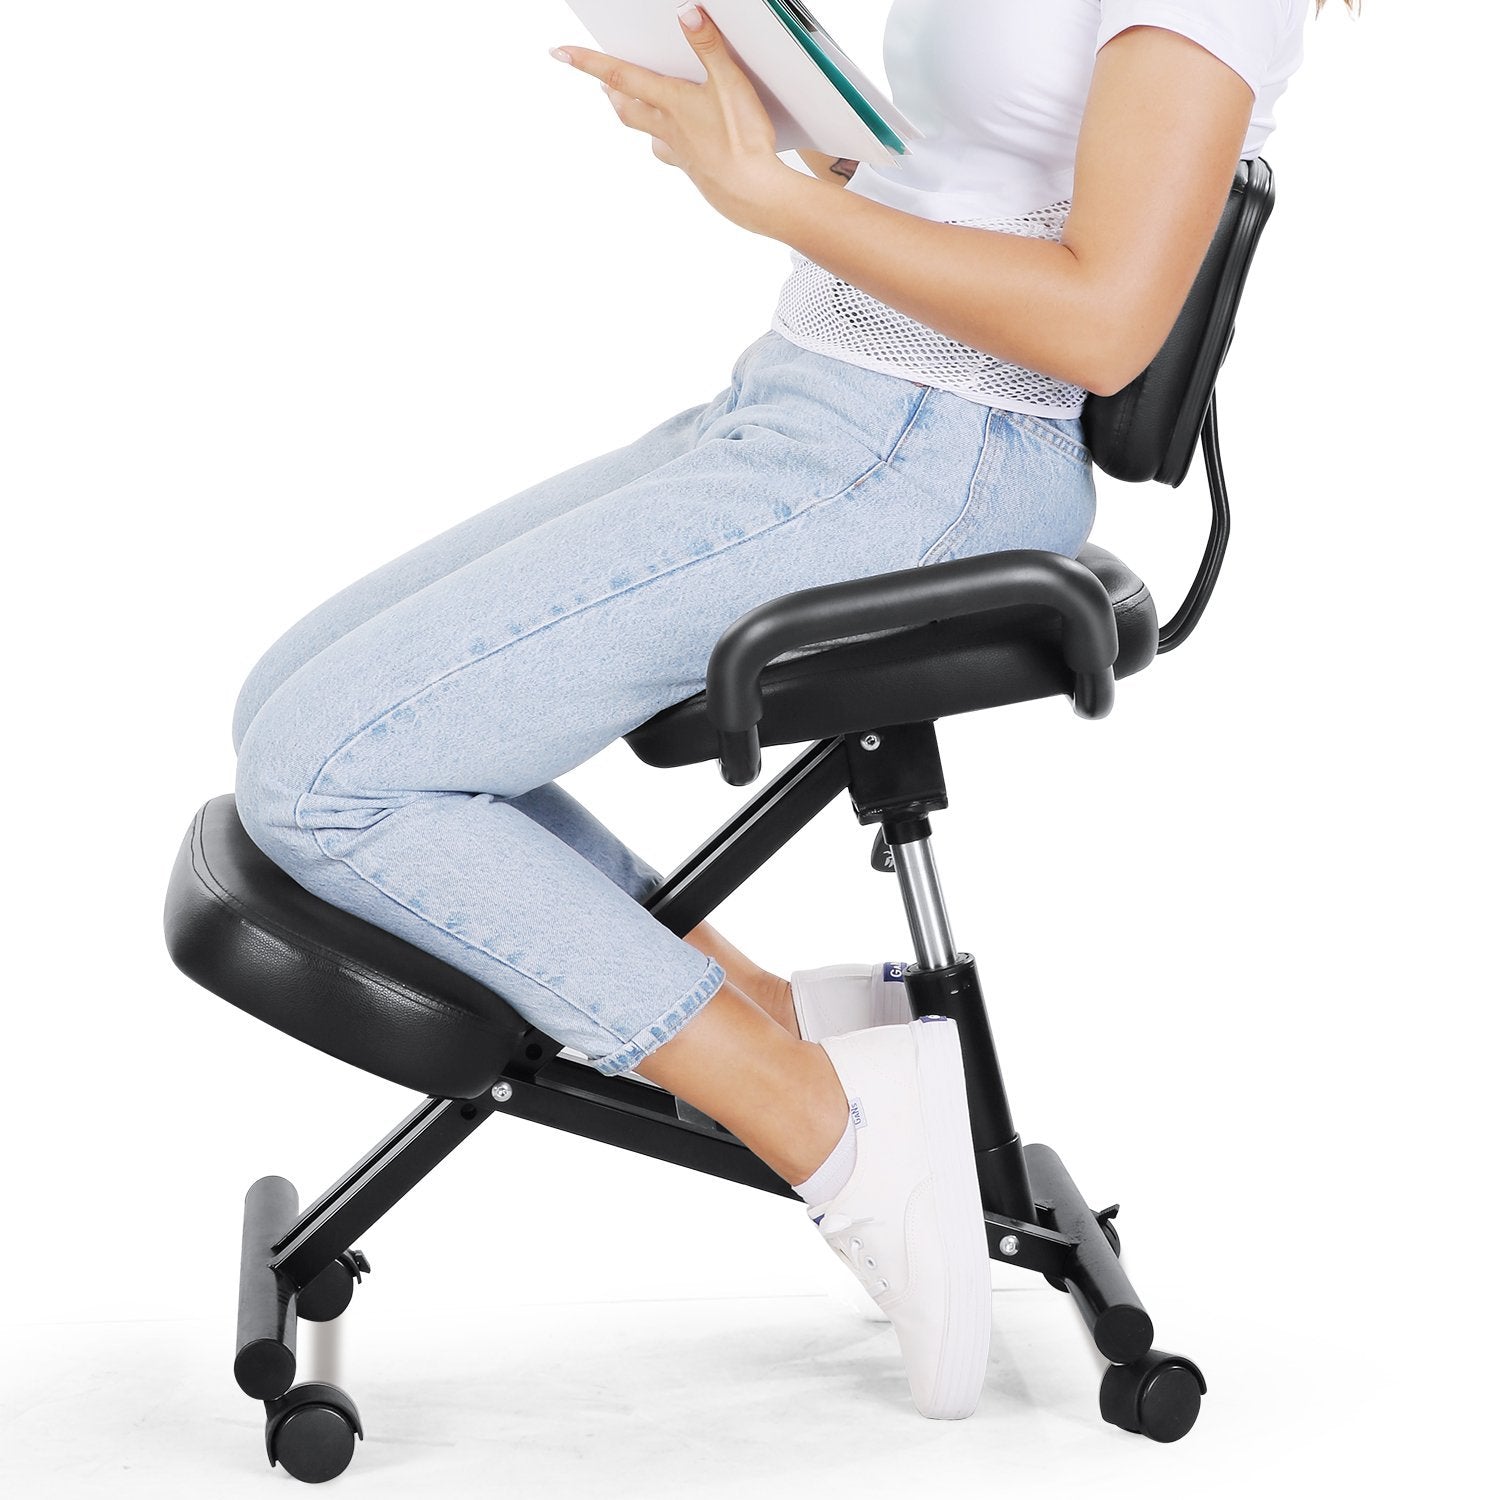 Kneeling Chair Ergonomic Desk Chair Office Chair，Improve Posture and Blood  Circulation with Back Support Designed ZHJING (Color : Blue)